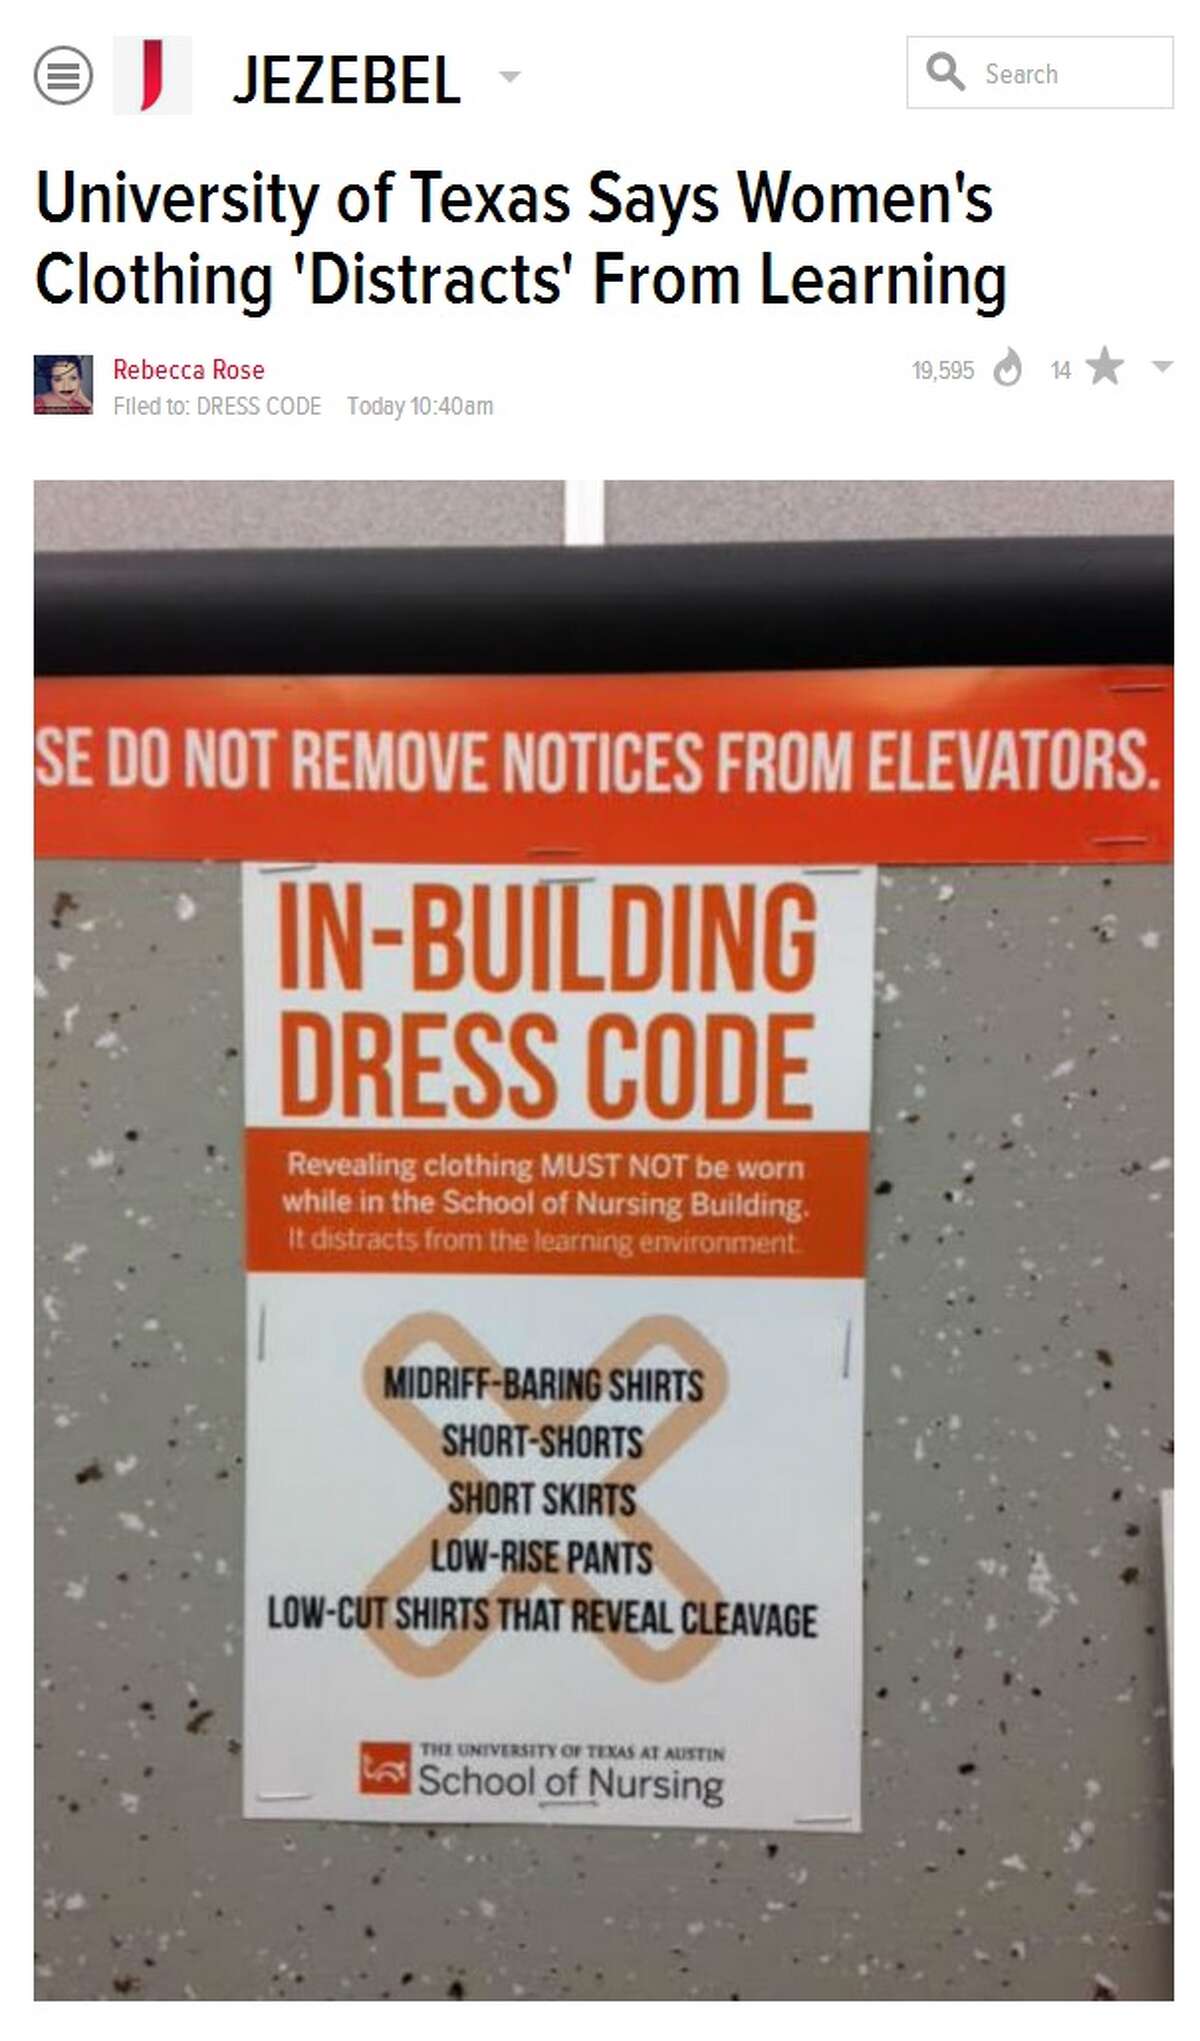 Dress code sign removed by University of Texas officials.